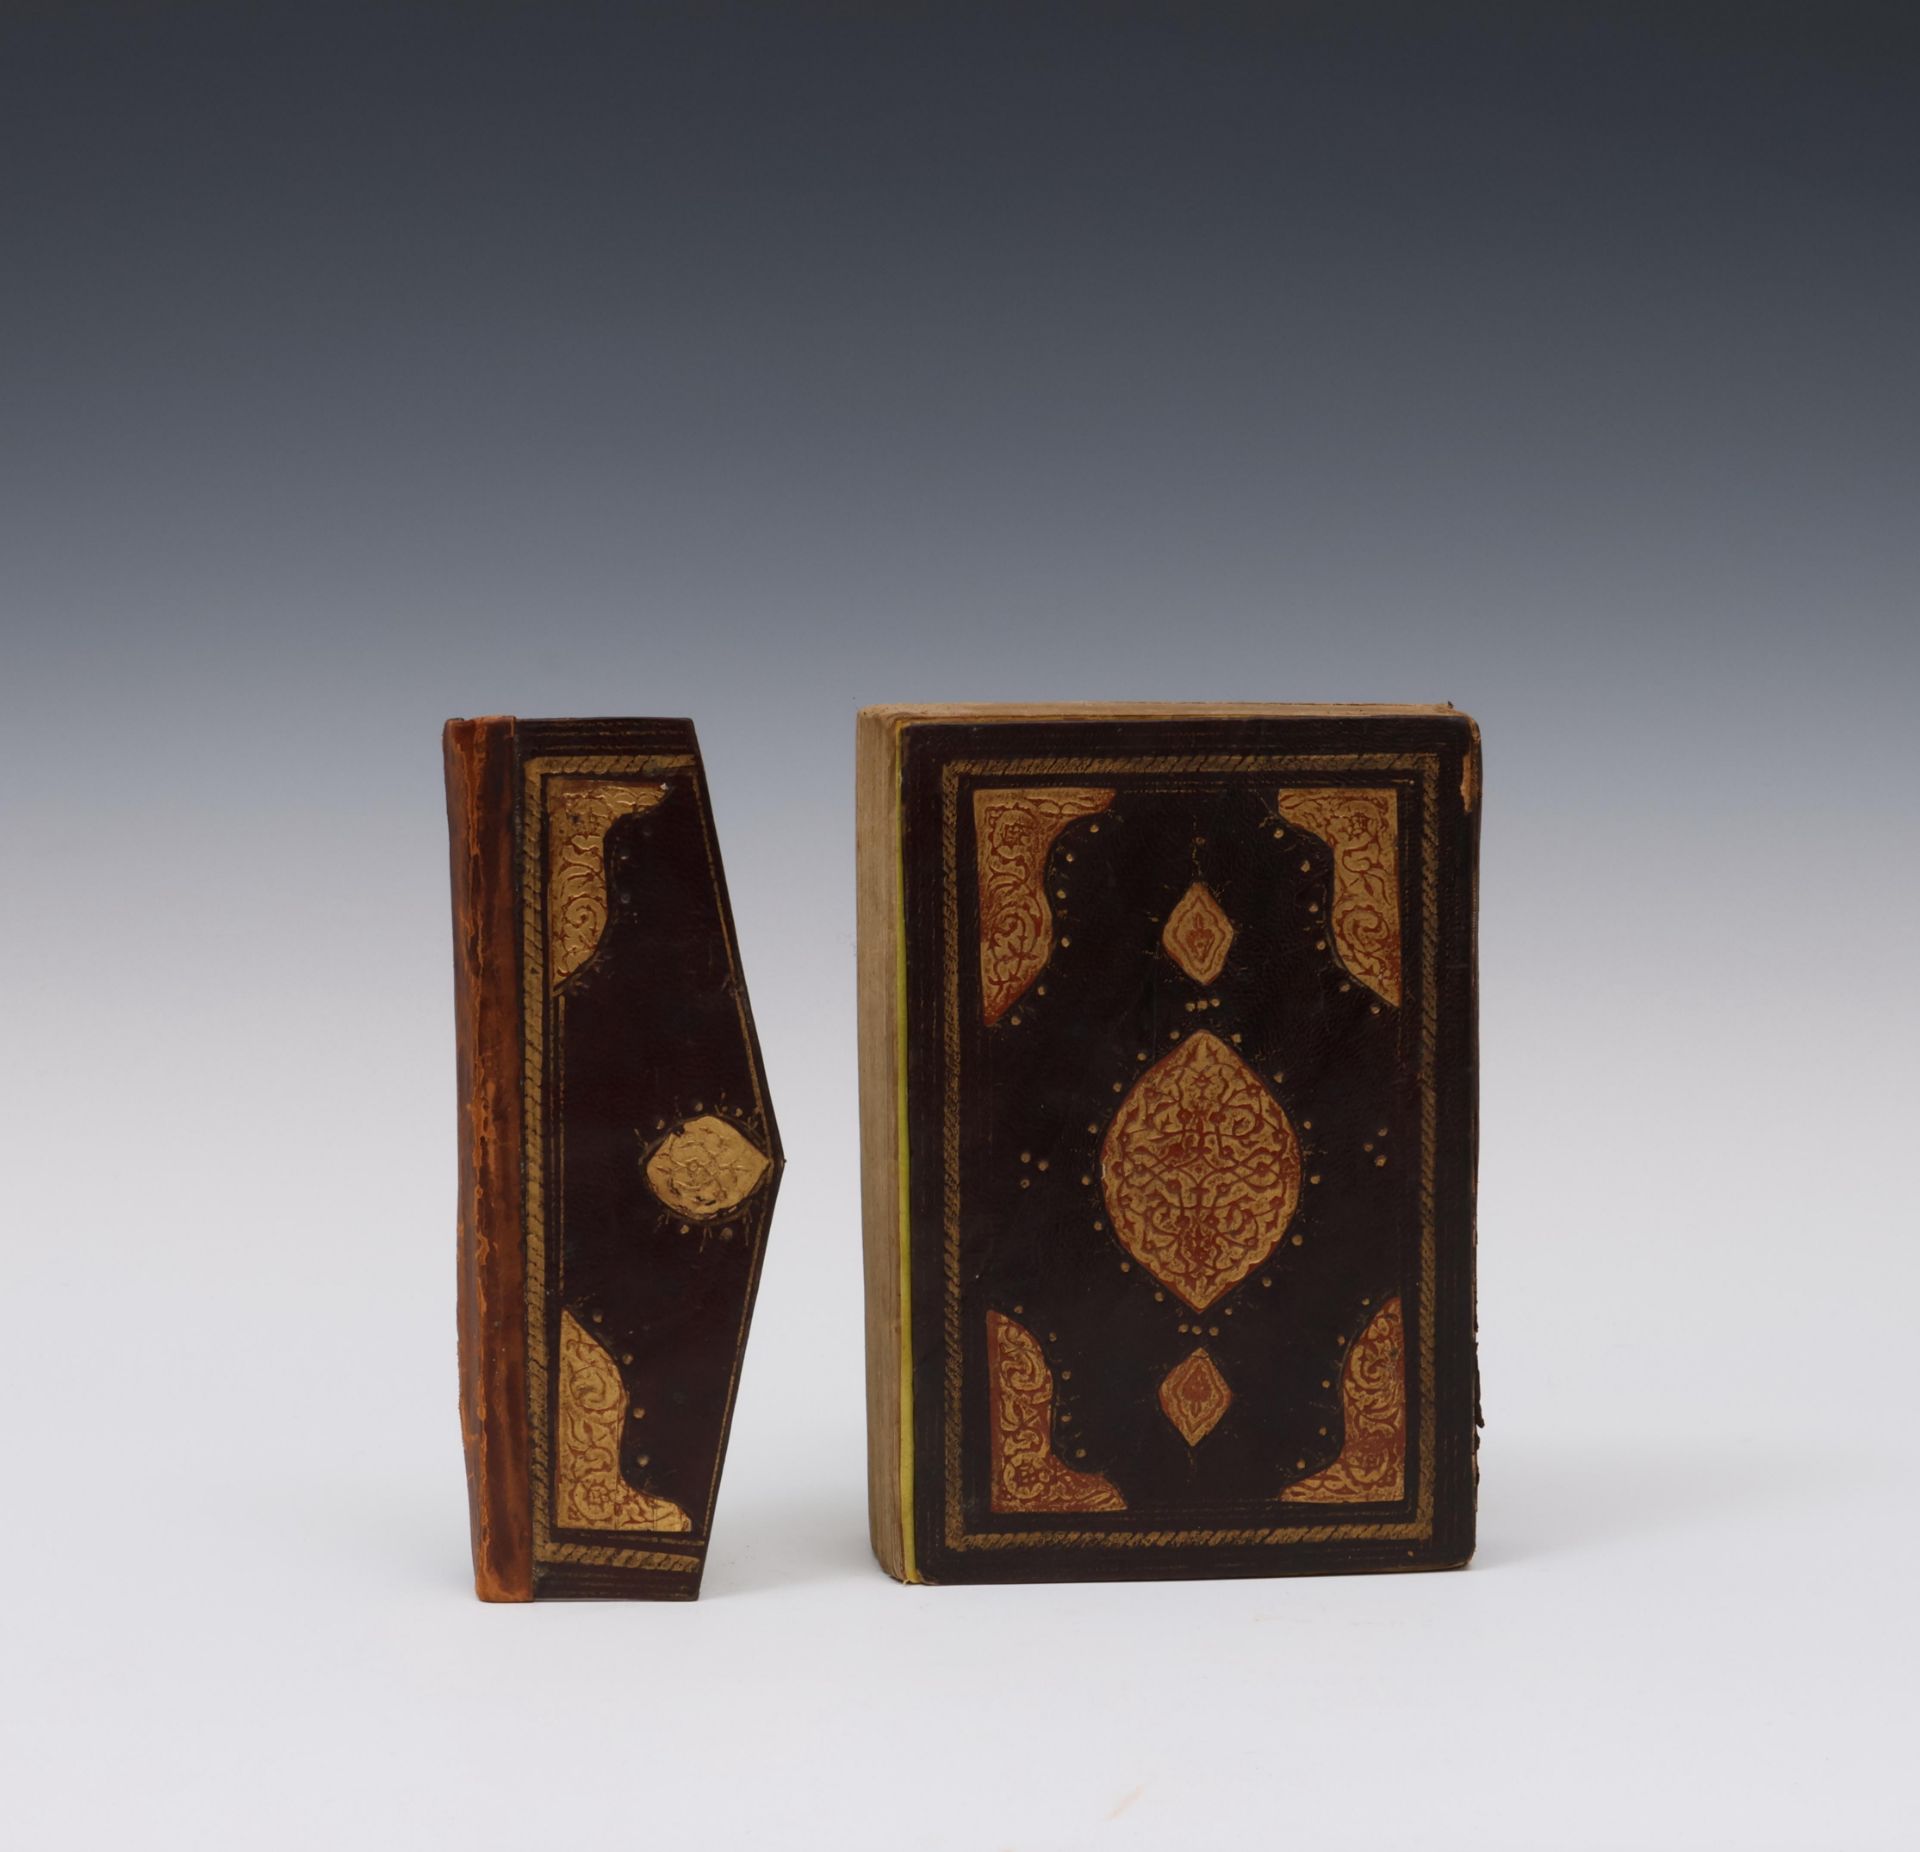 Iran, possibly Qajar, a Koran in leather bound, ca. 1900, - Image 2 of 2